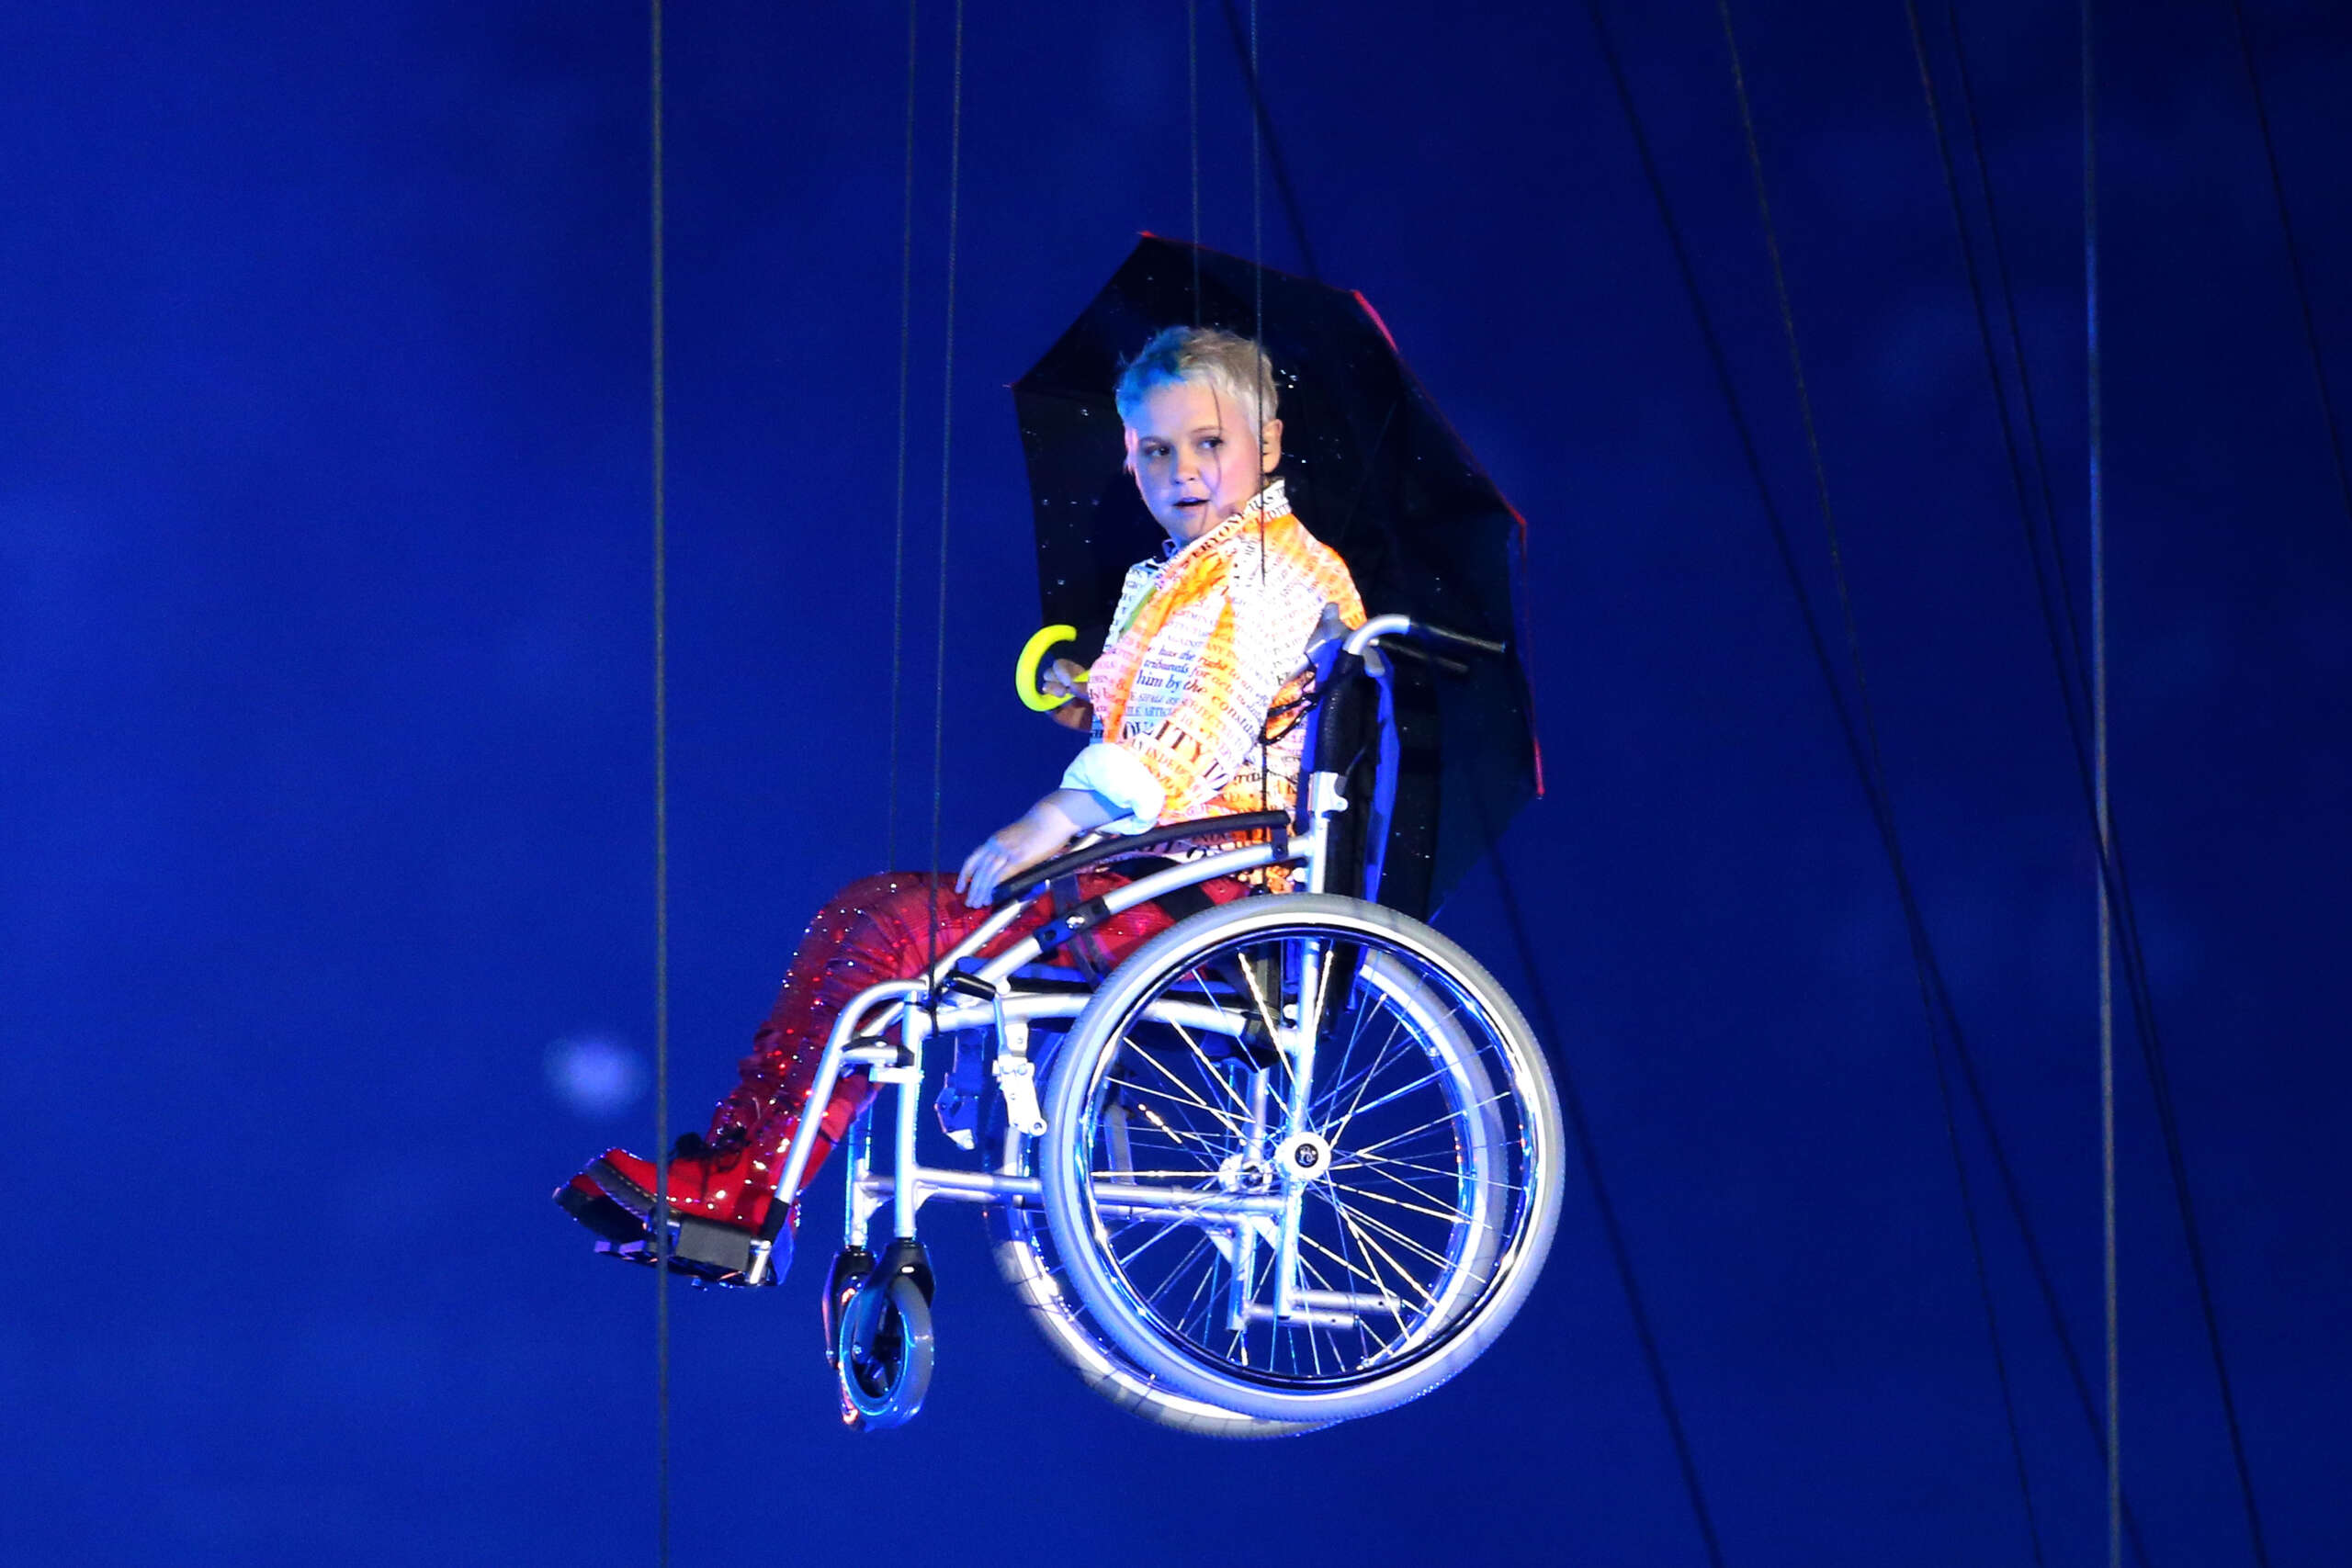 A young performer in a wheelchair, is suspended in the air. He is white, with short blonde hair, wearing a yellow shirt, red checked trousers, and red boots. He is holding a large black umbrella.